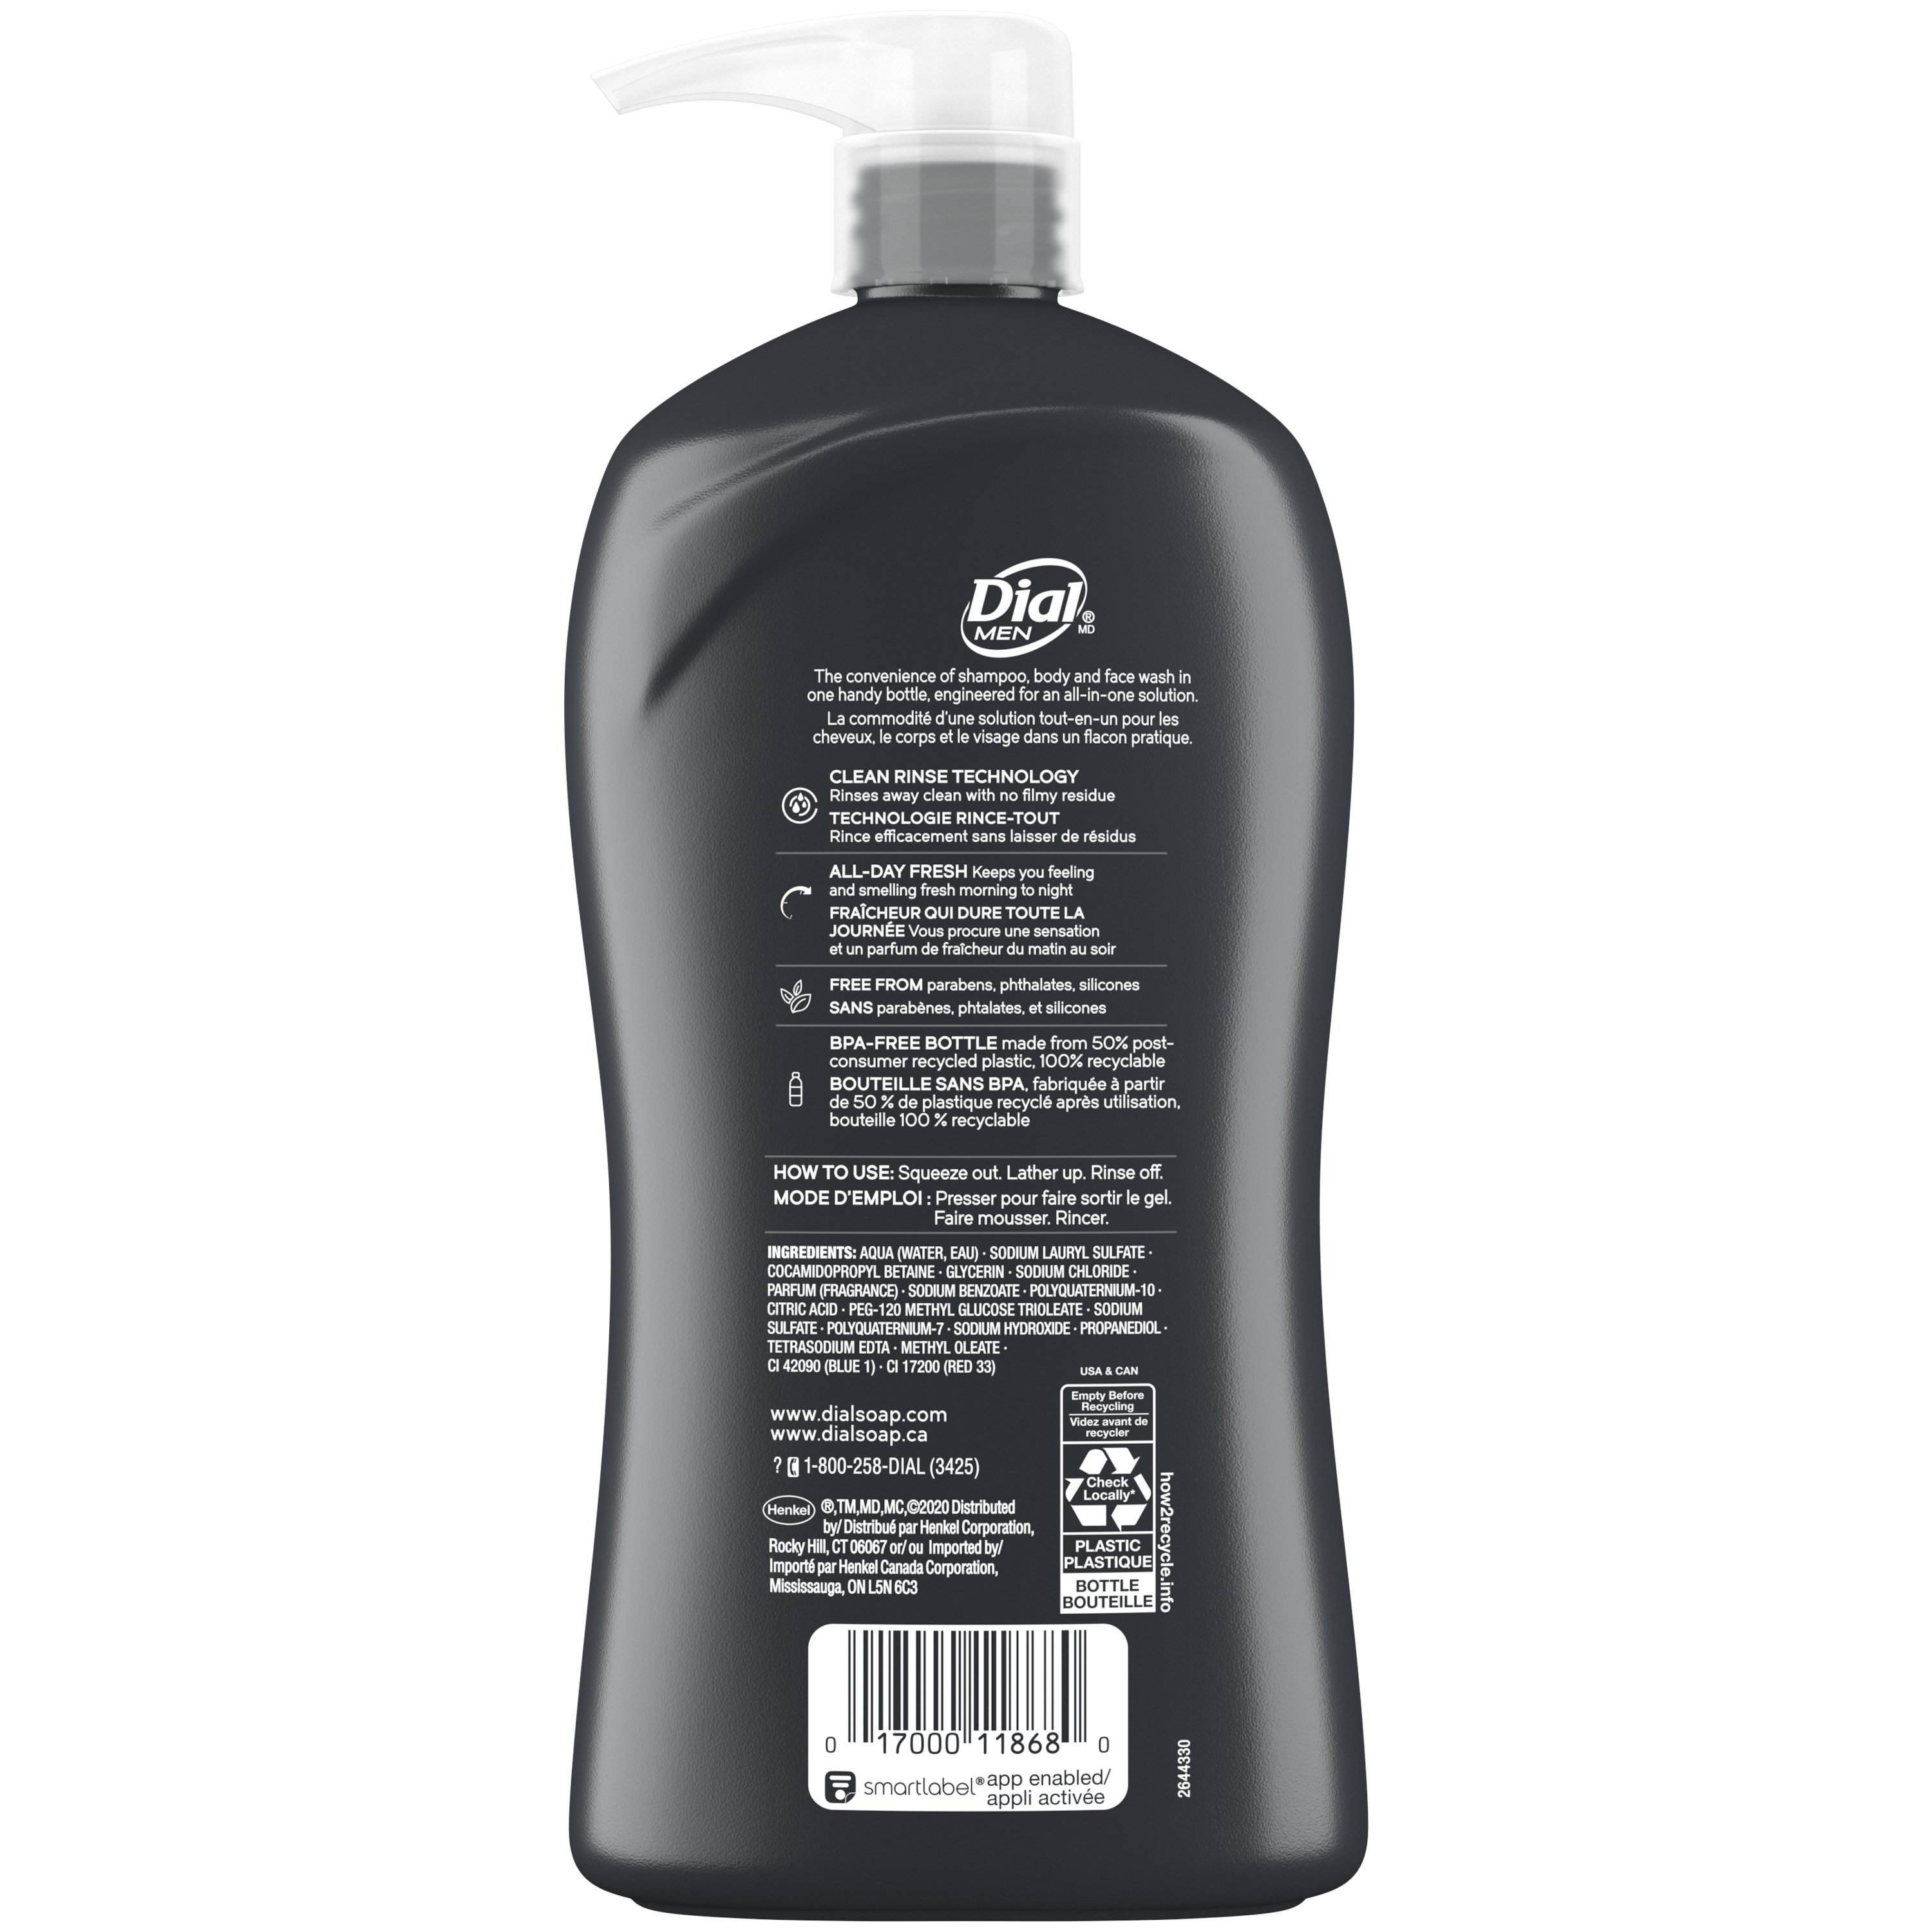 Dial Men 3in1 Body, Hair and Face Wash, Ultimate Clean, 32 fl oz - image 3 of 10